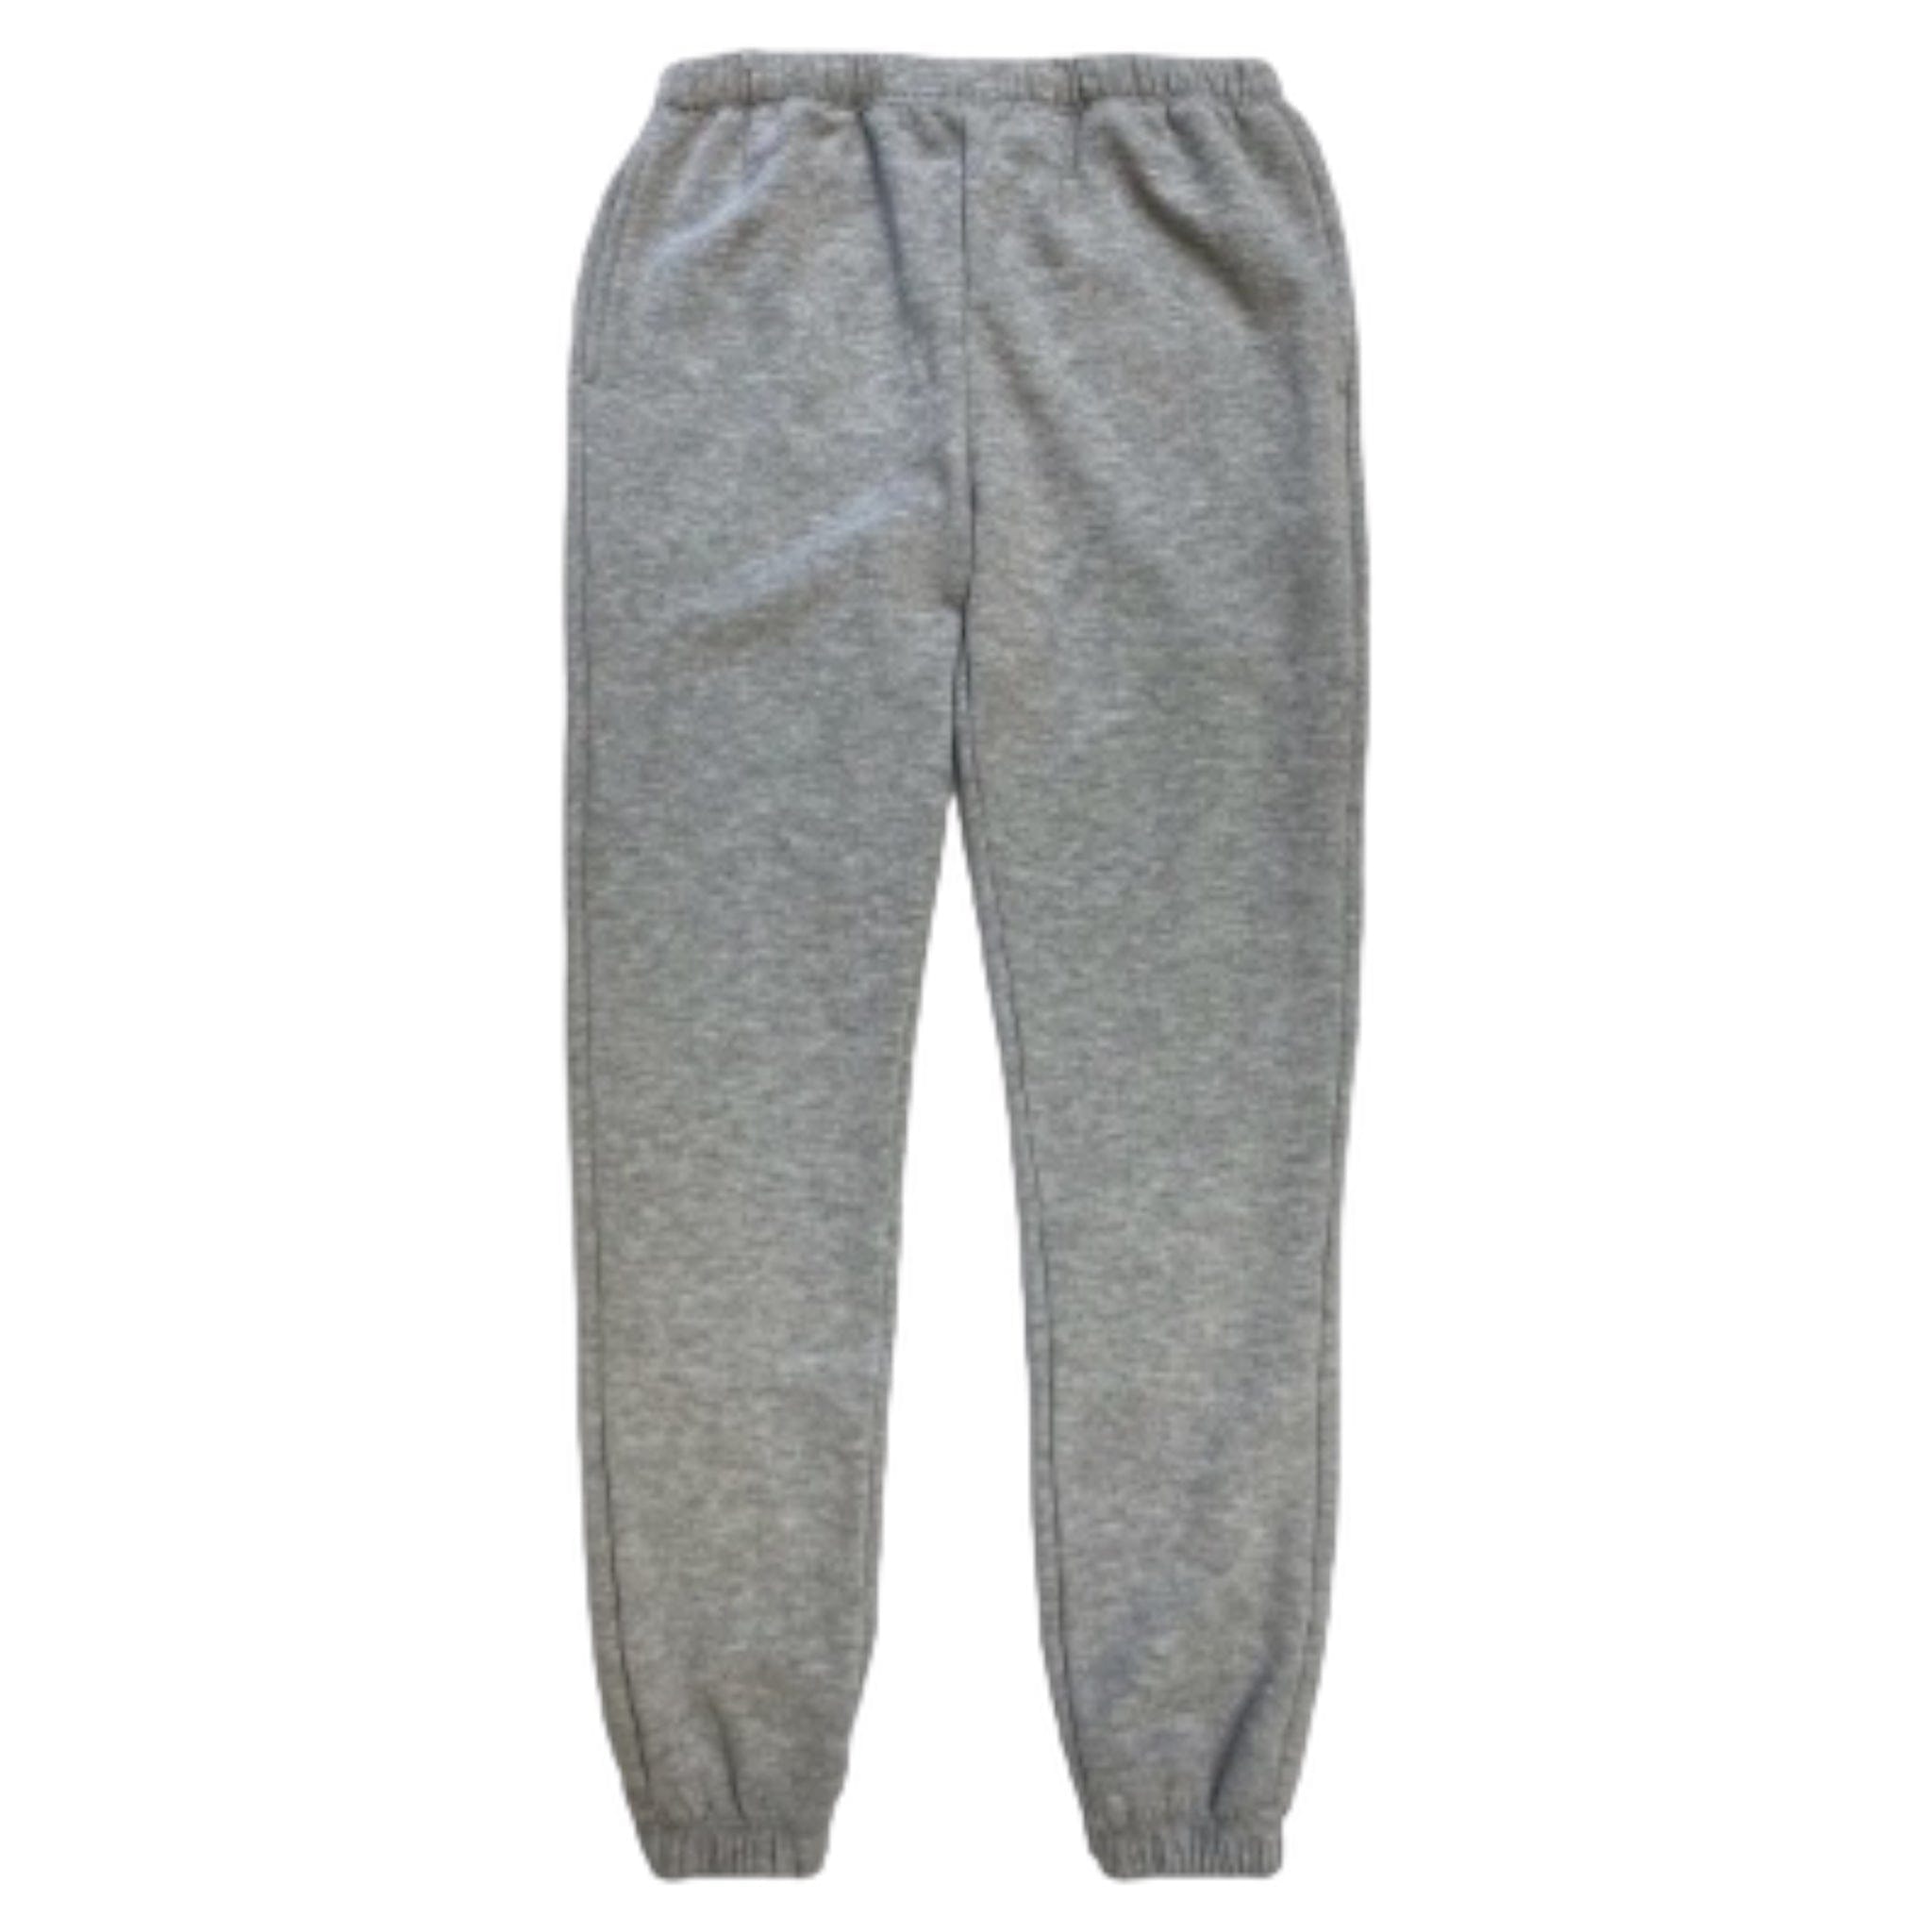 Brushed Cloud Joggers in Grey and Black